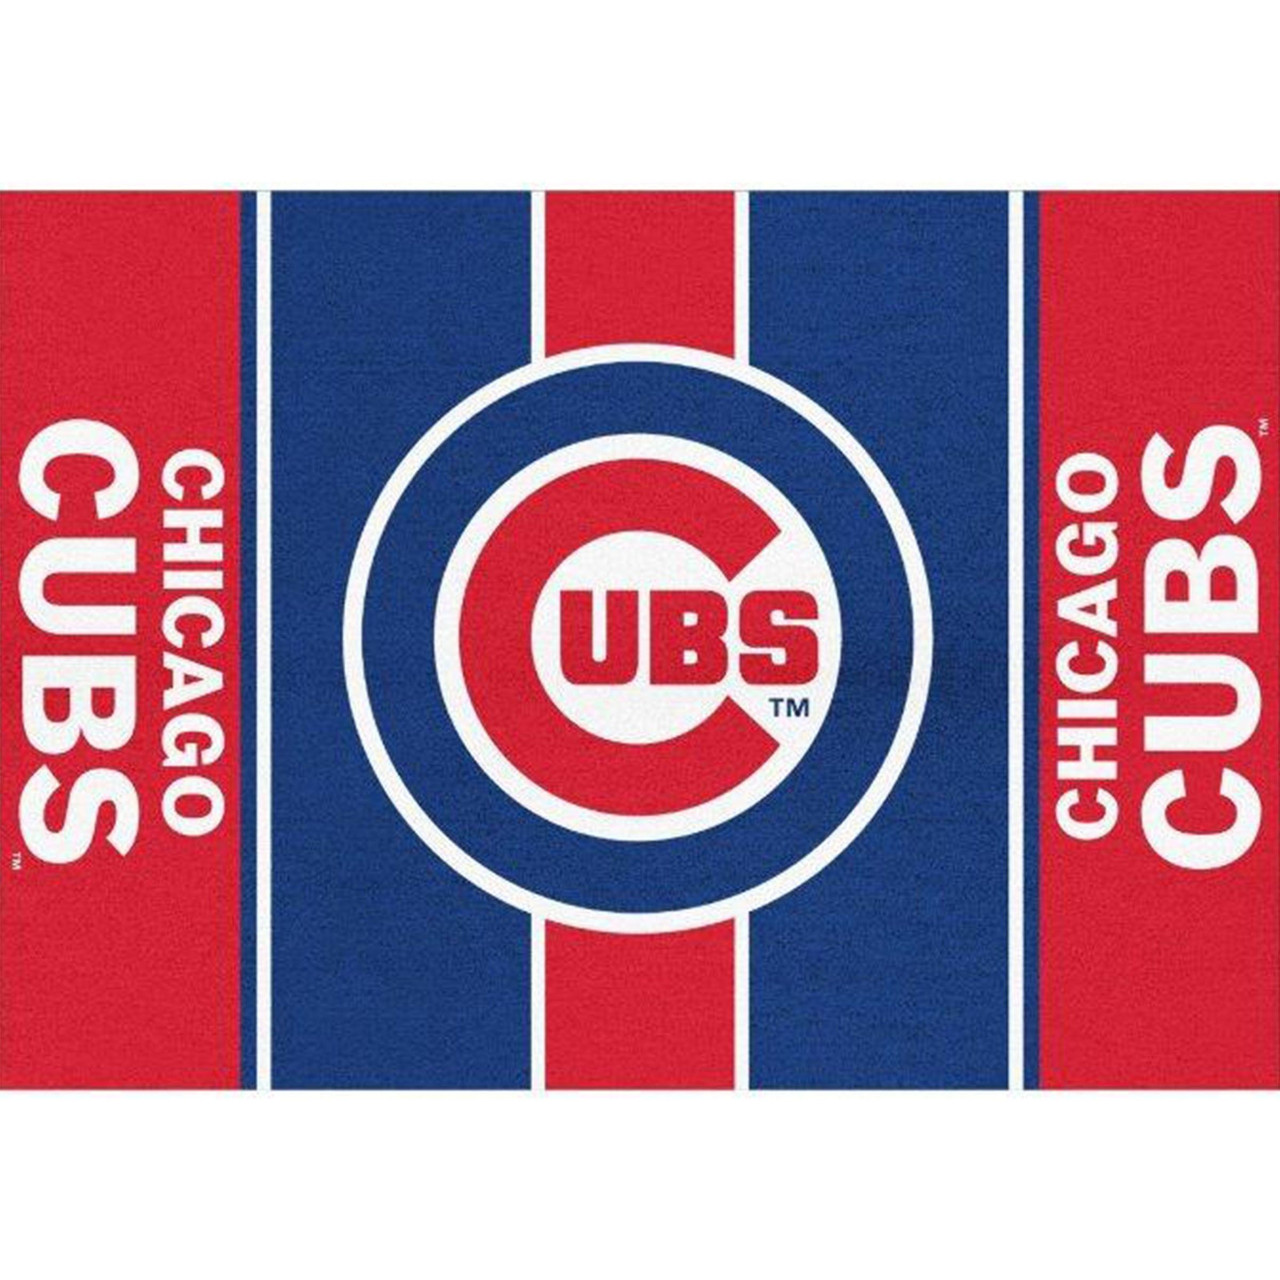 543-2005, Chicago Cubs, CHI, 8'x11', Victory, Area, Rug, Imperial, MLB,720801432052, Stainmaster